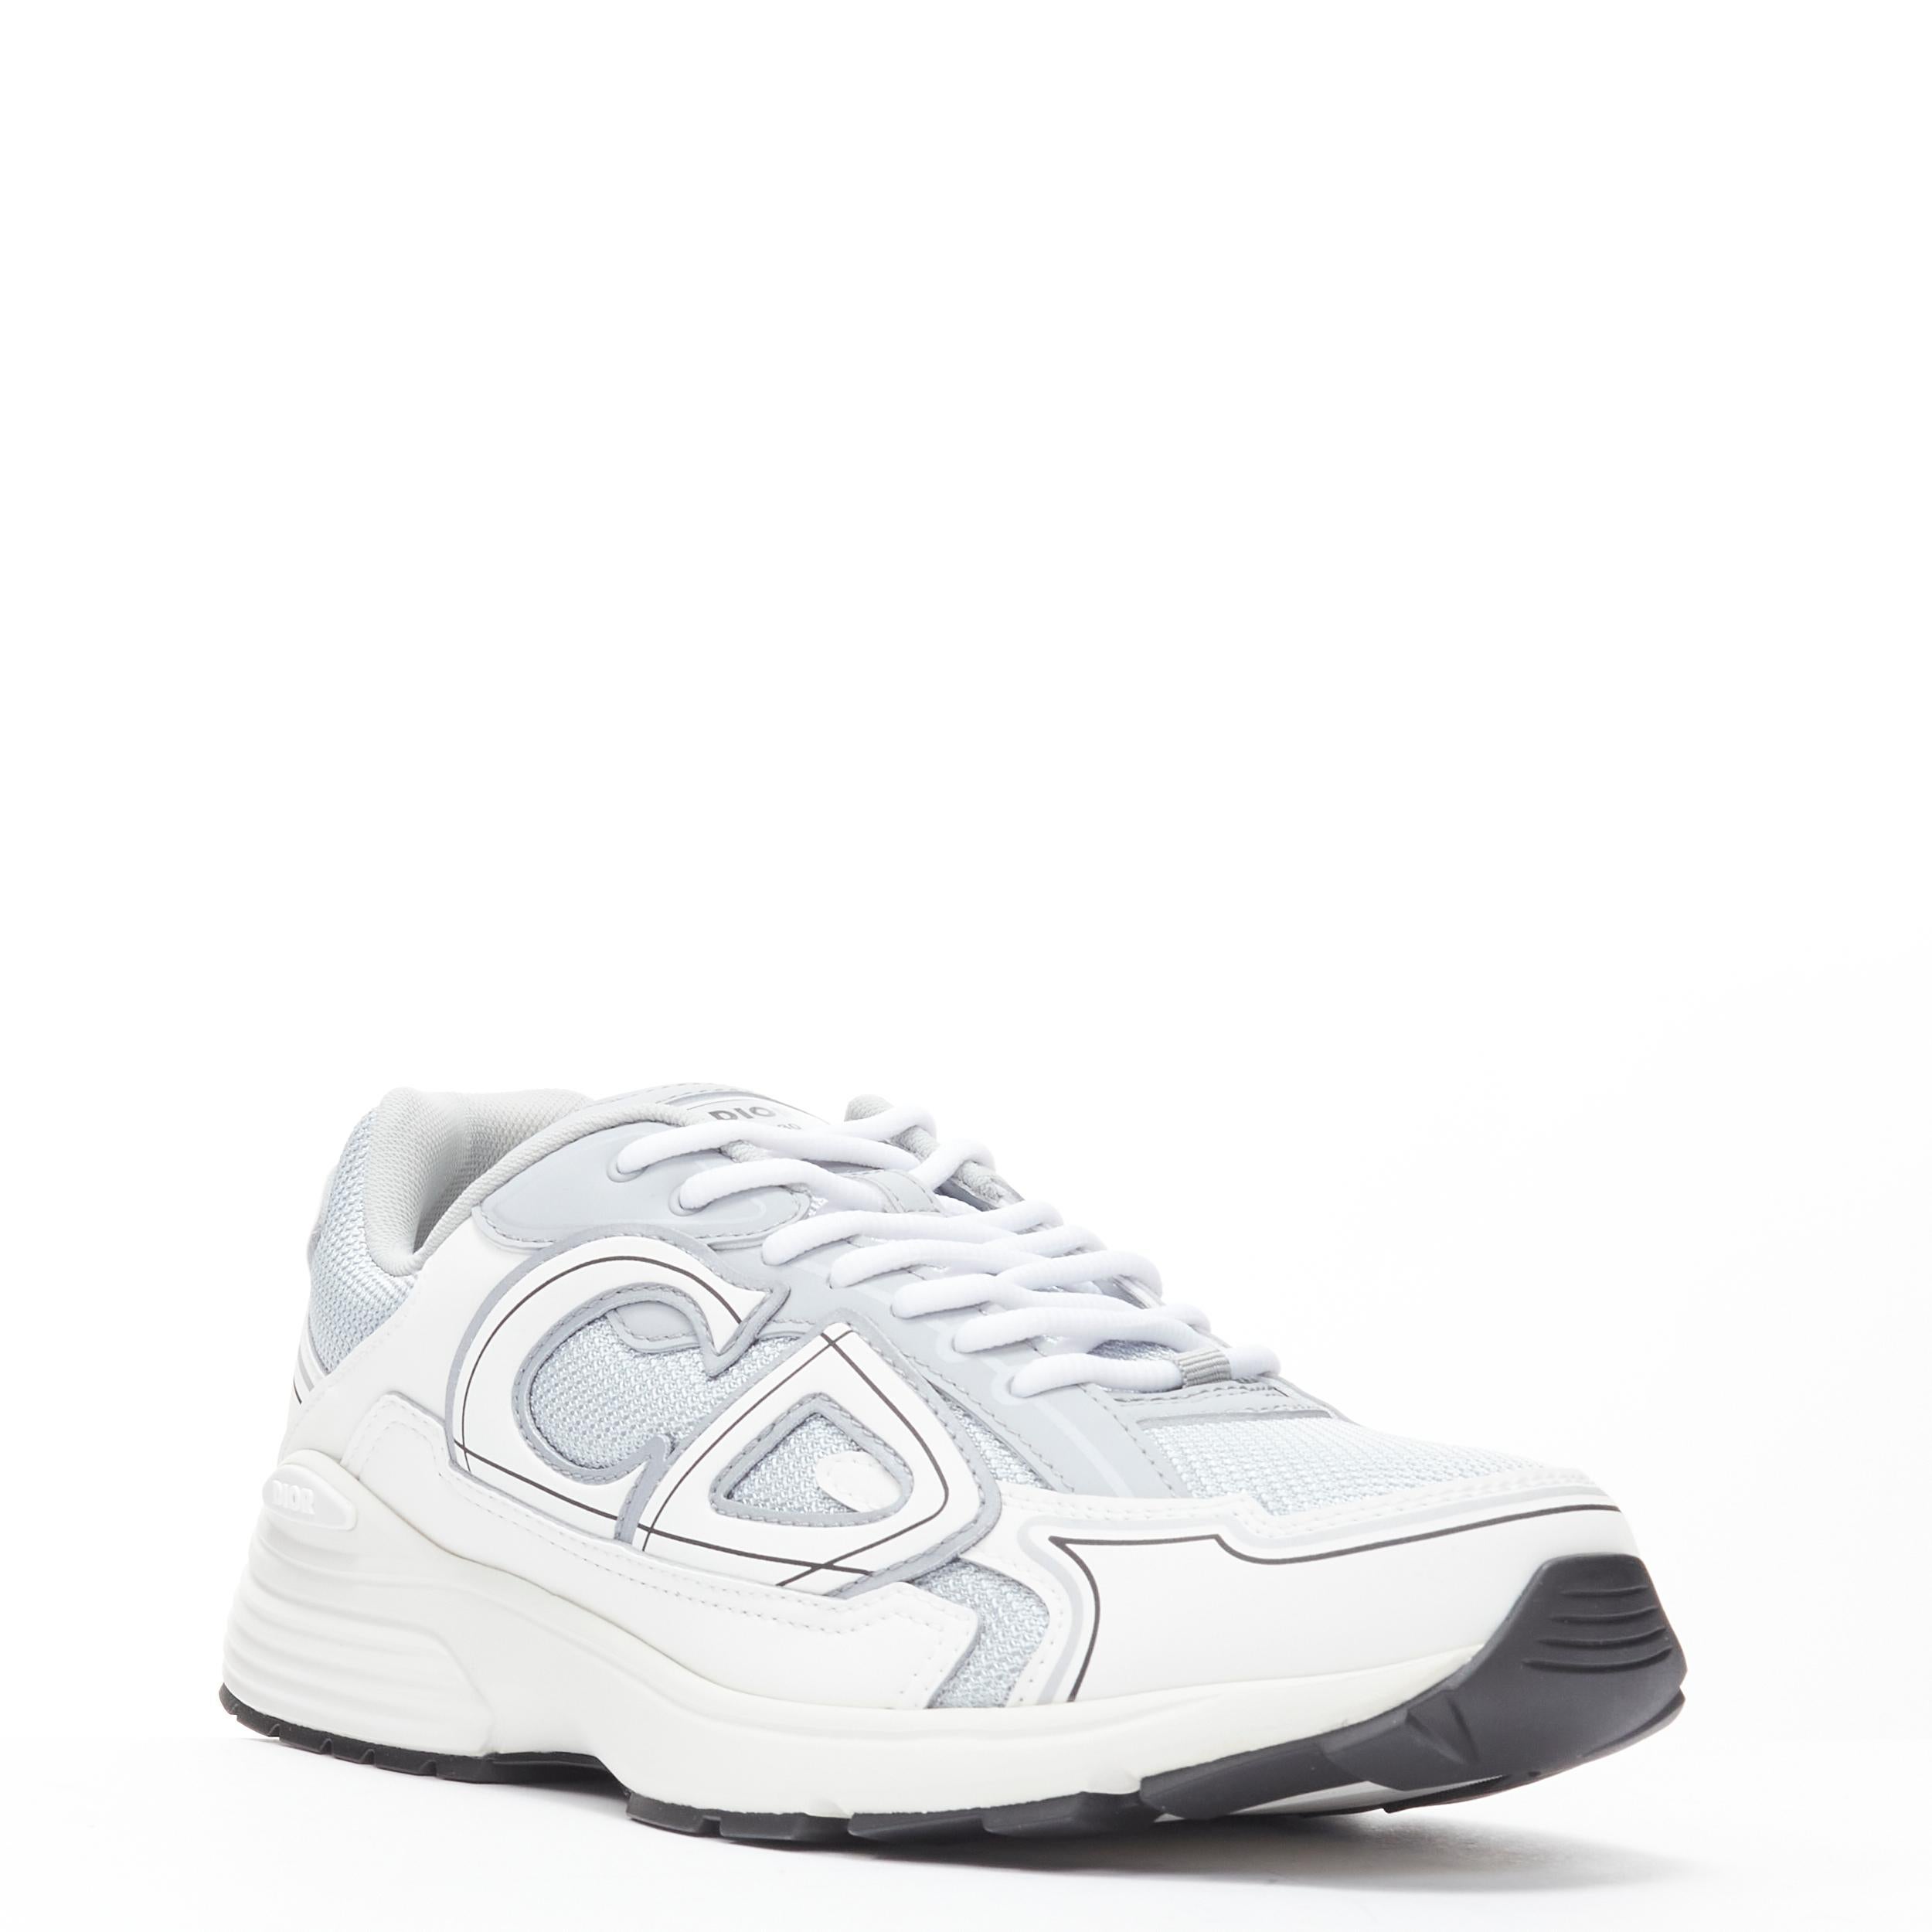 new CHRISTIAN DIOR B30 CD white leather grey mesh low runner sneaker EU42 
Reference: JOMK/A00015 
Brand: Christian Dior 
Designer: Kim Jones 
Model: B30 sneaker 
Material: Leather 
Color: White 
Pattern: Solid 
Closure: Lace UP 
Extra Detail: B30.